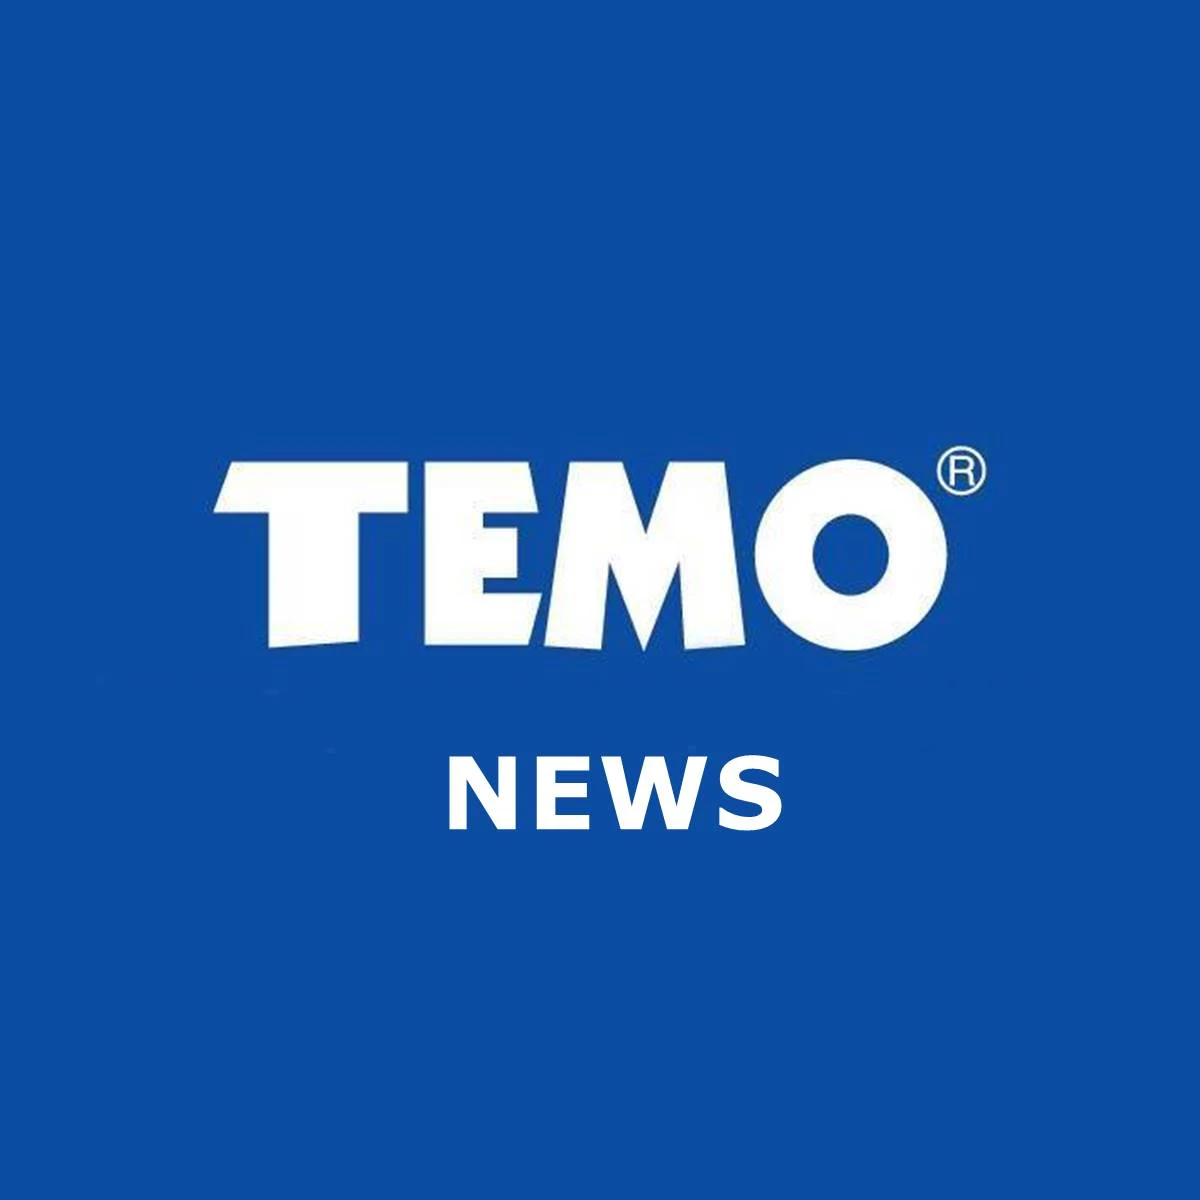 How To Work With Temo News?